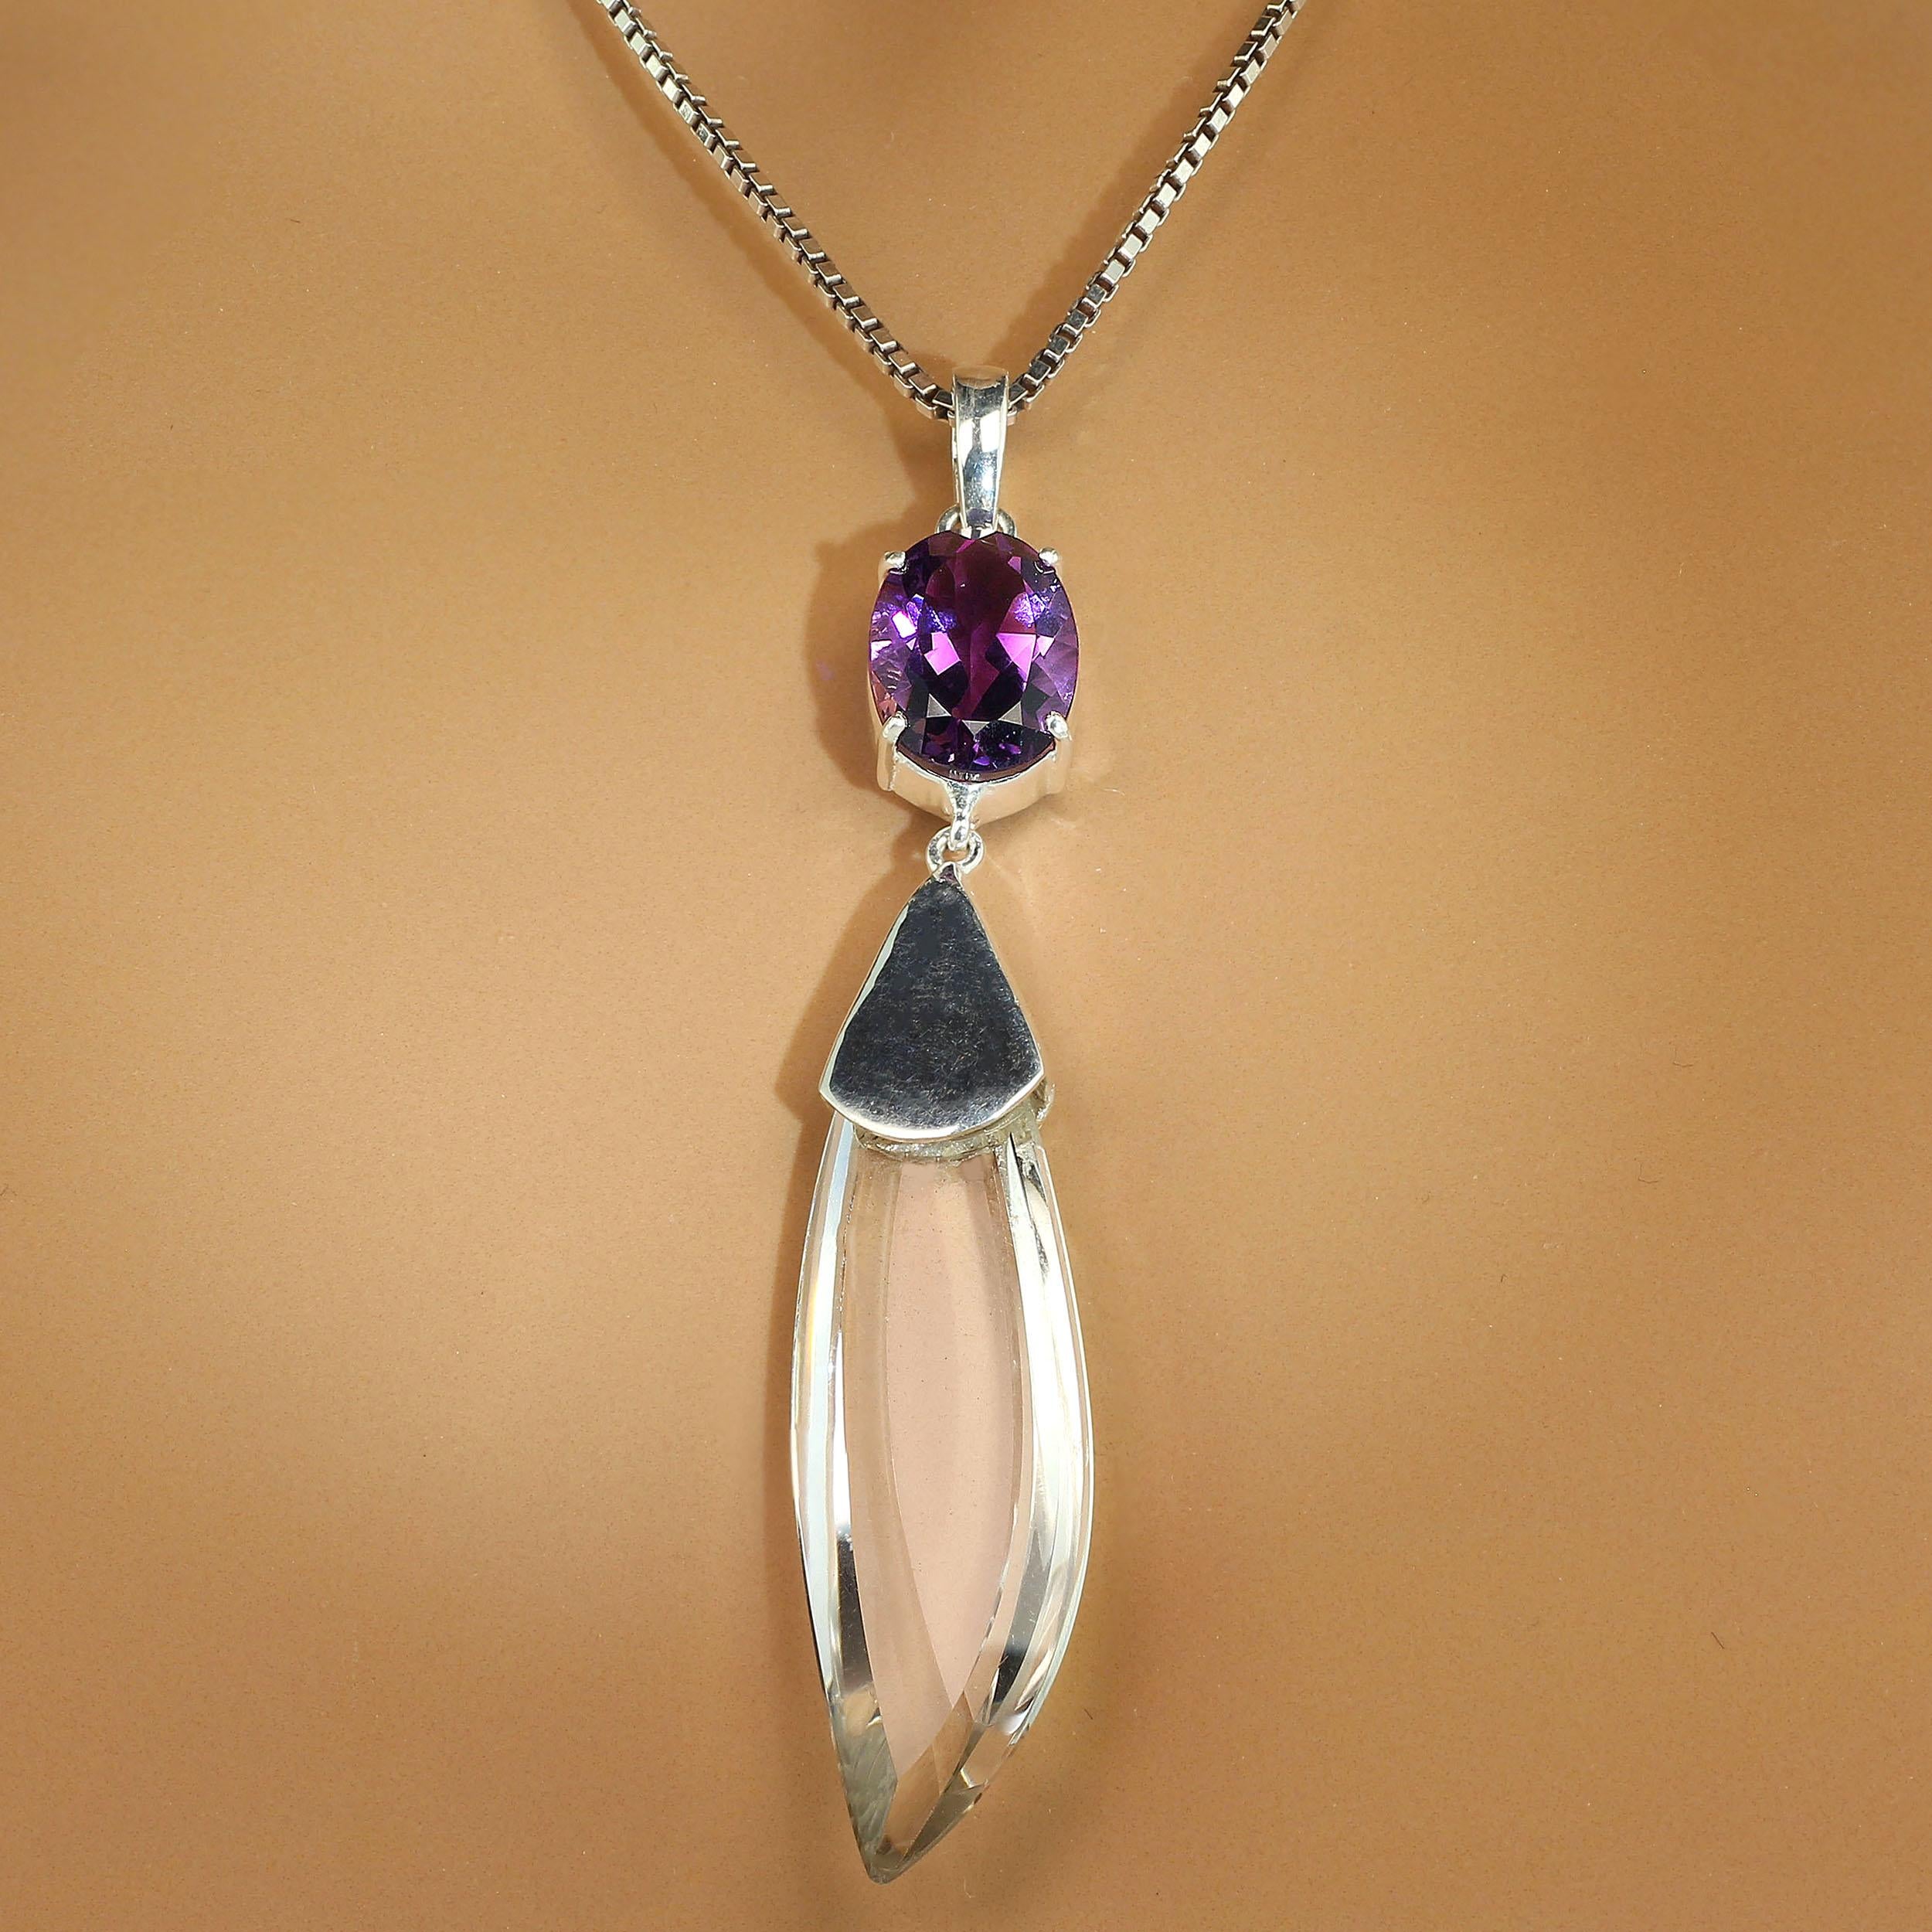 Artisan AJD Swing & Sway with This Unique Amethyst & Crystal Pendant February Birthstone For Sale